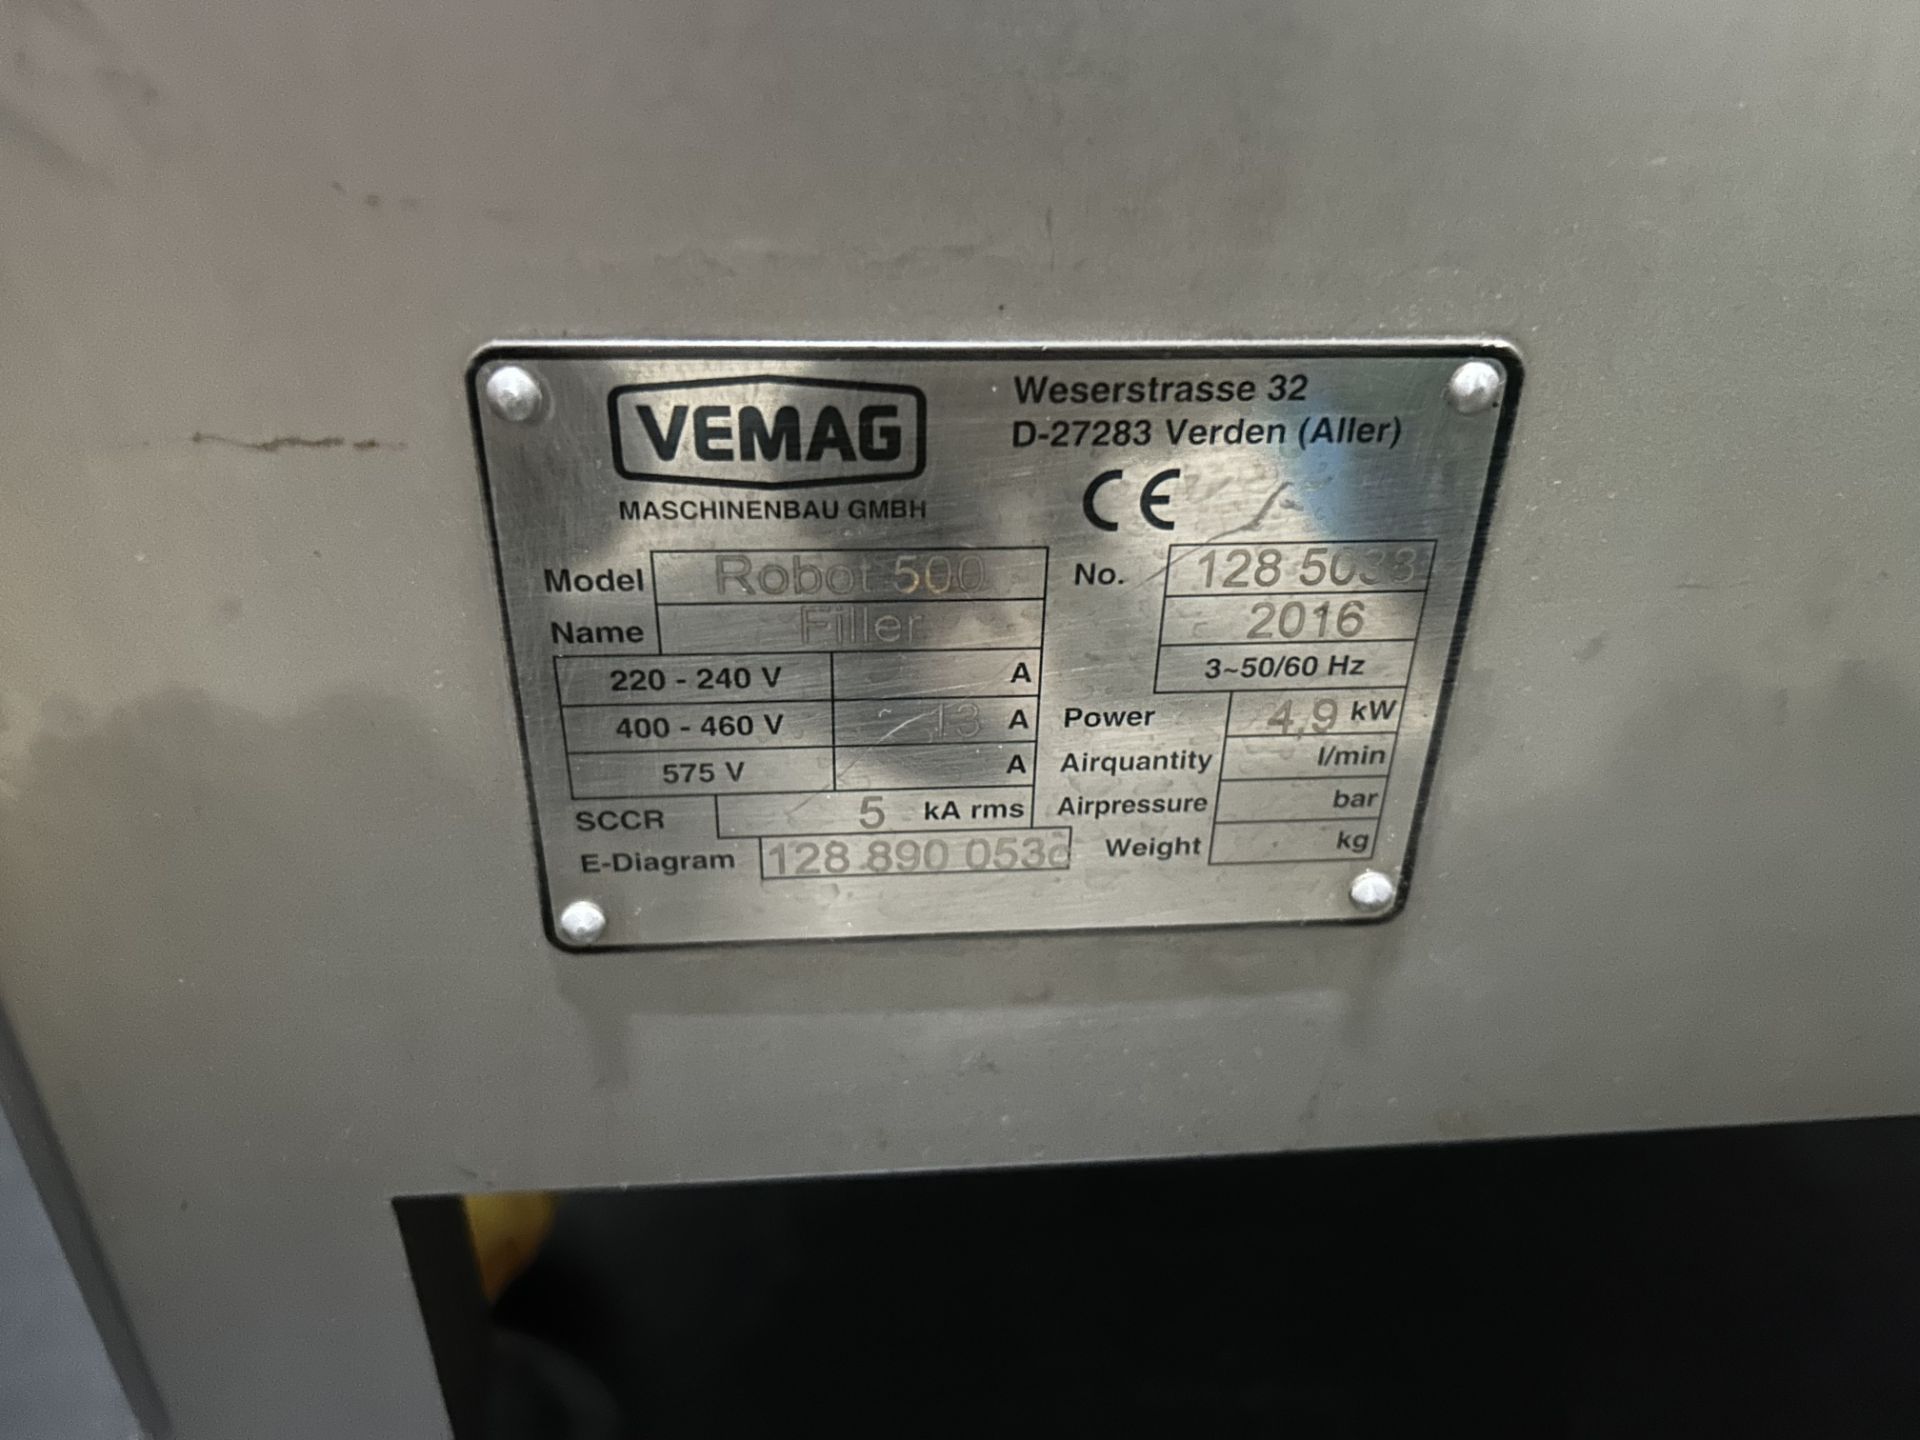 Lot Location: St. Louis MO - Vemag Robot 500 Extruder/Stuffer, DOM 2016, S/N #1285033 - Image 10 of 10